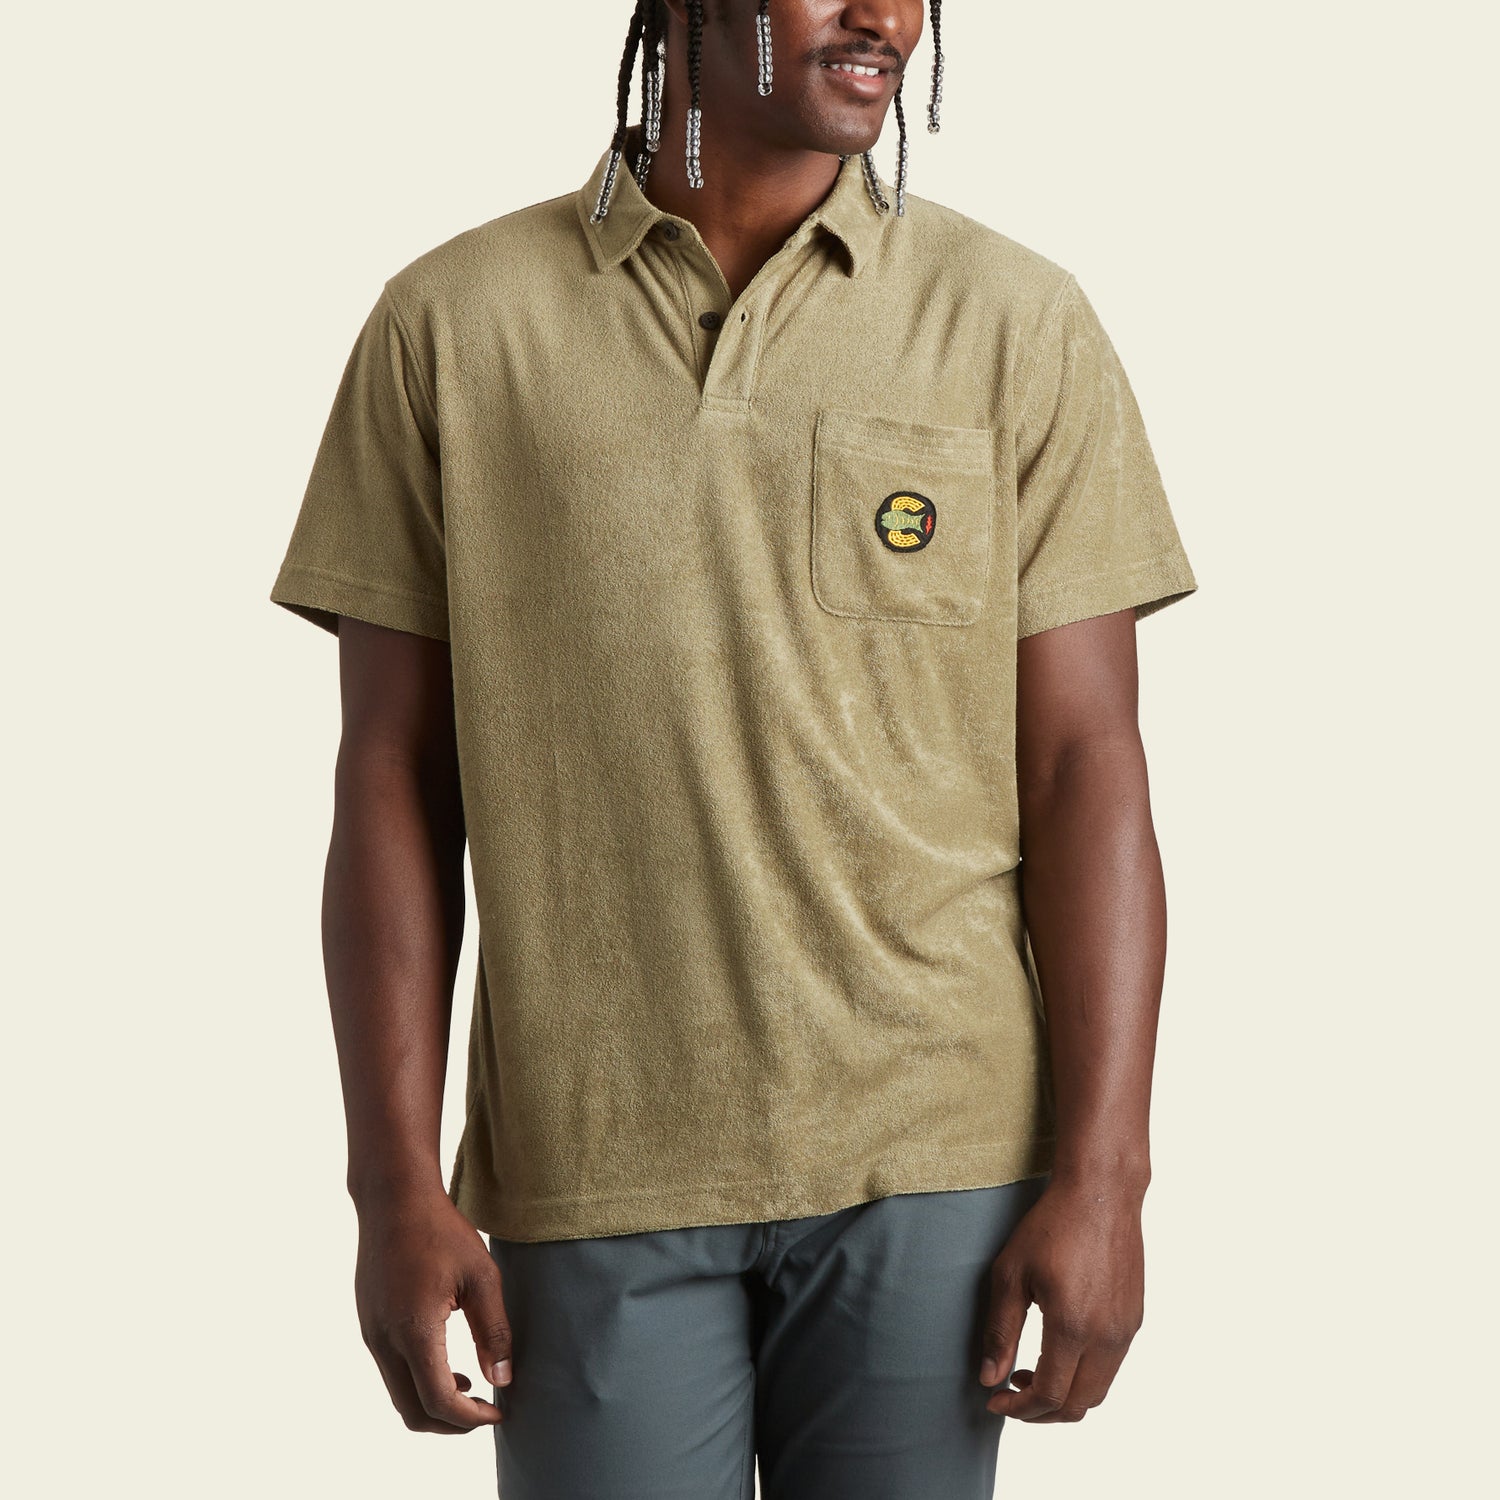 Howlin' Short Sleeve Color Block Terry Shirt Butter In The Sun at